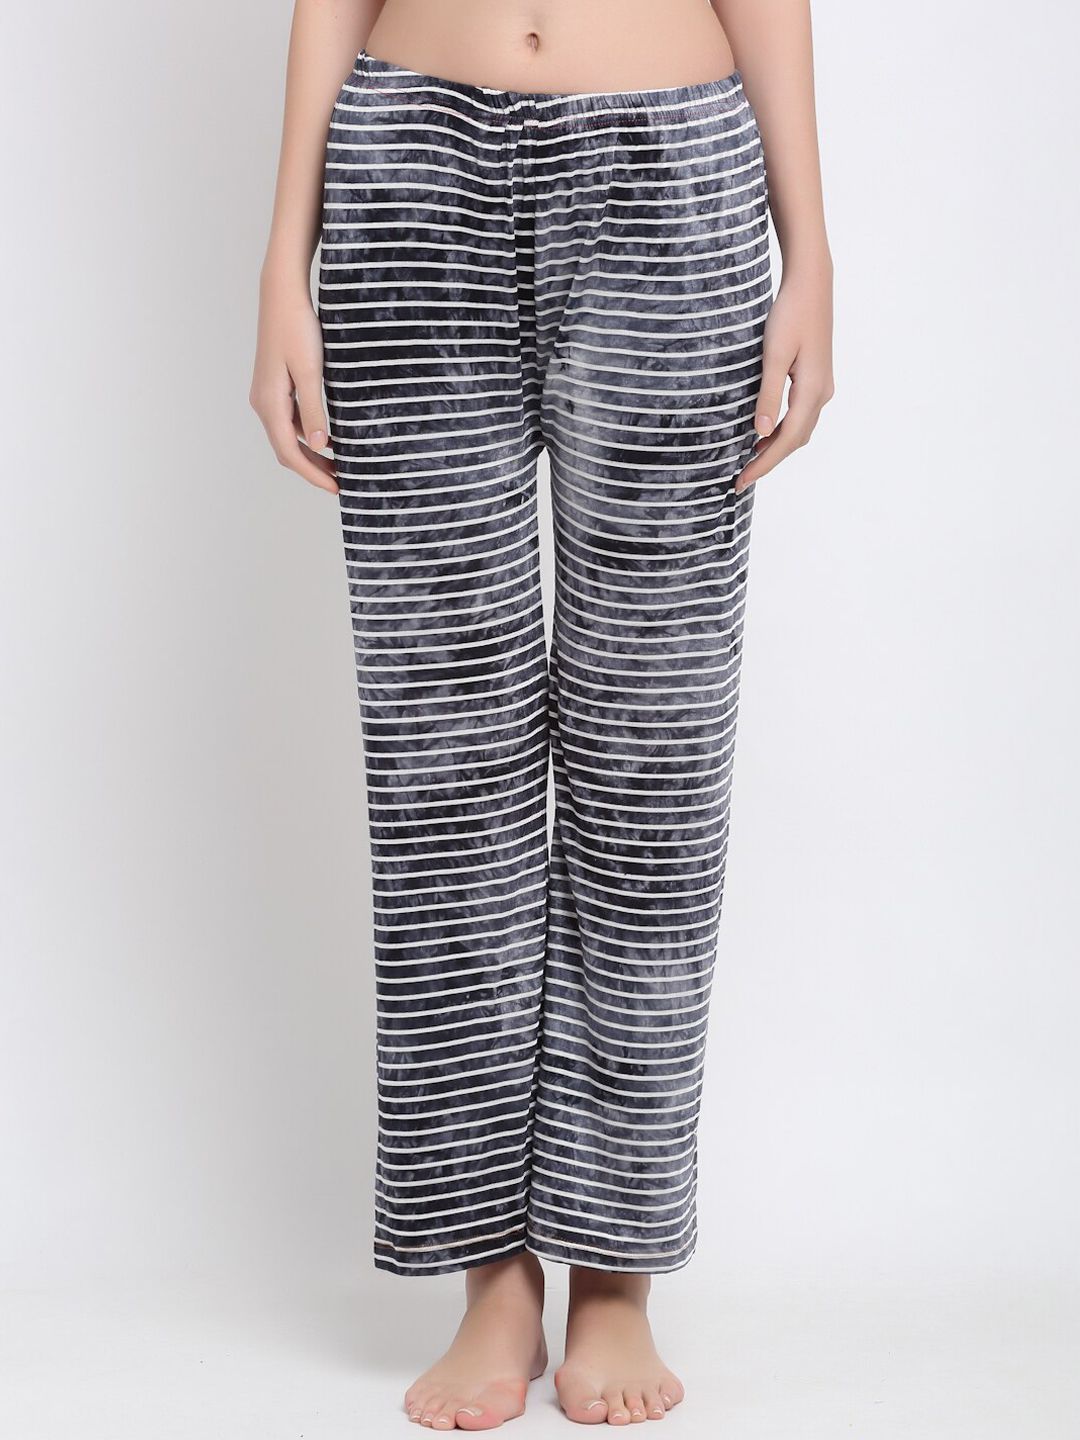 armure Women Black & White Striped Lounge Pants Price in India